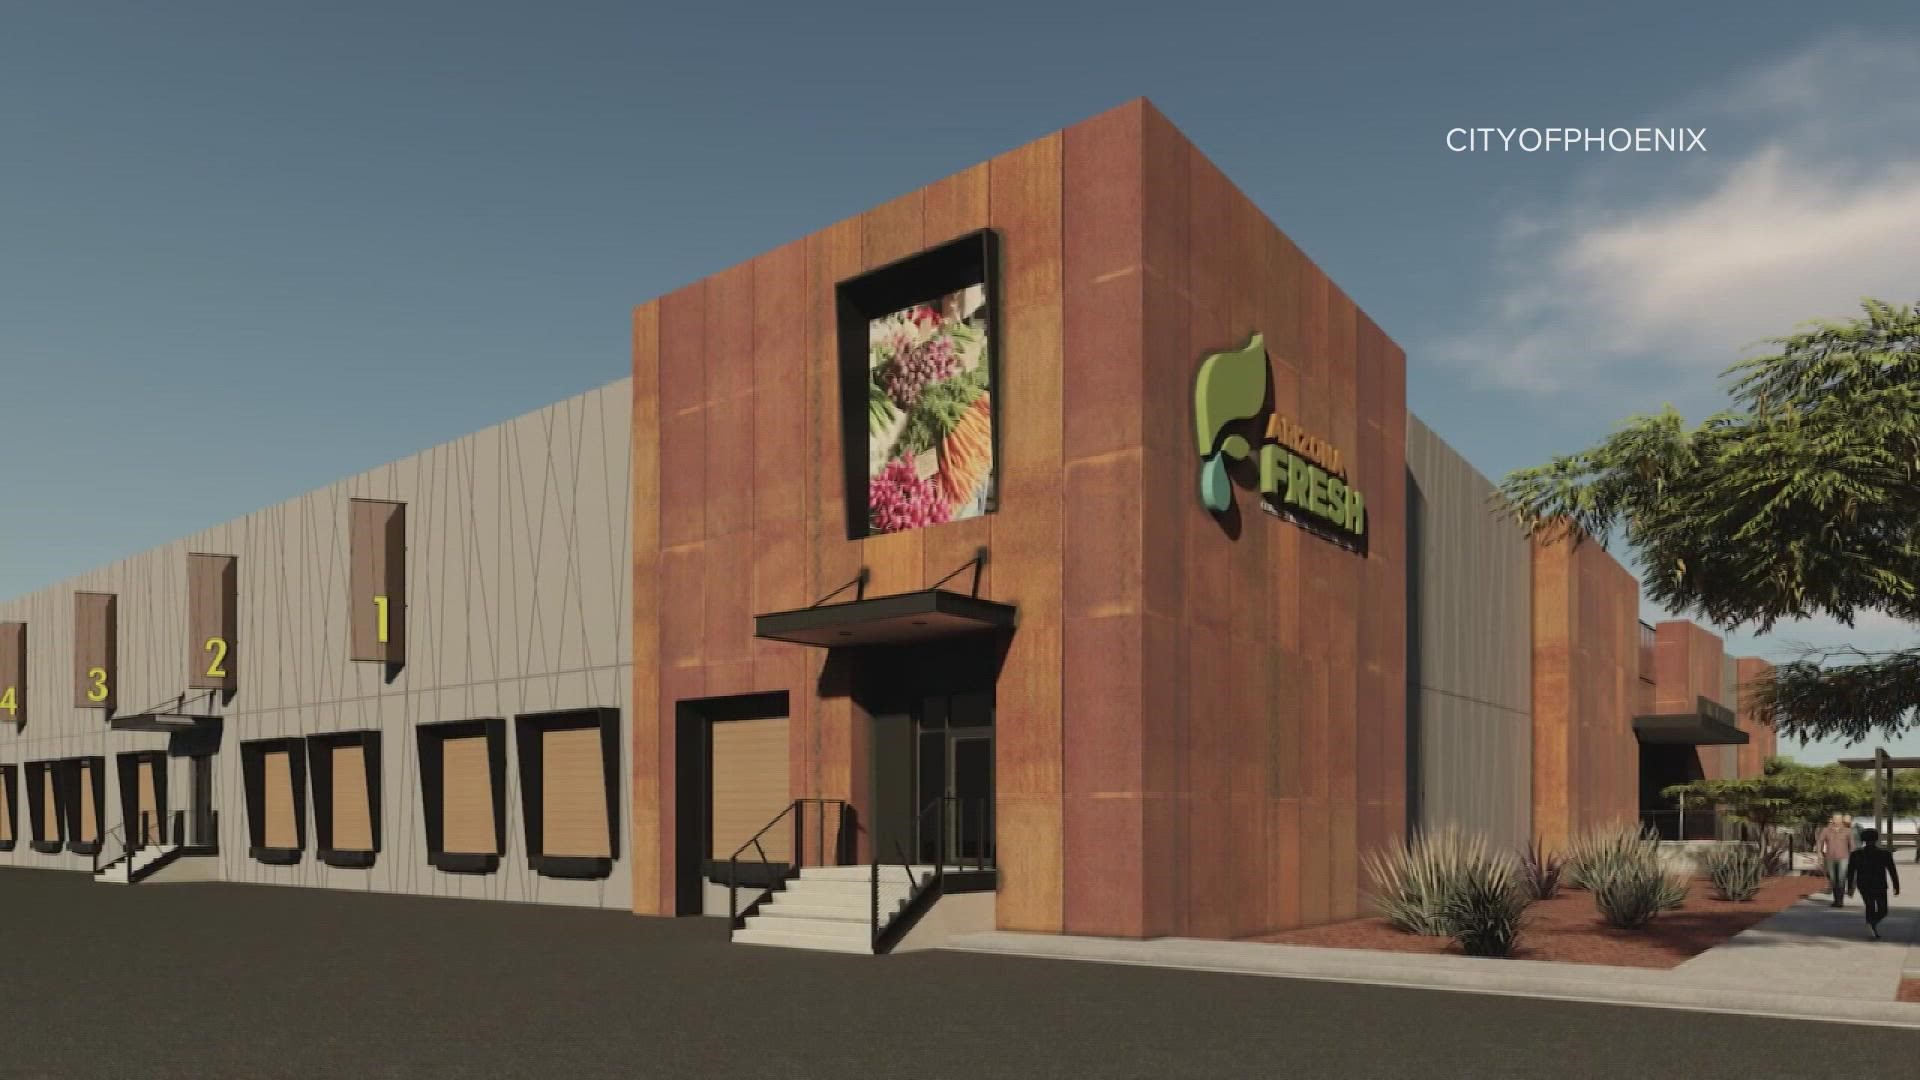 The Arizona Fresh project hopes to turn a former landfill into a place to find food in the neighborhood. Jen Wahl has the details.